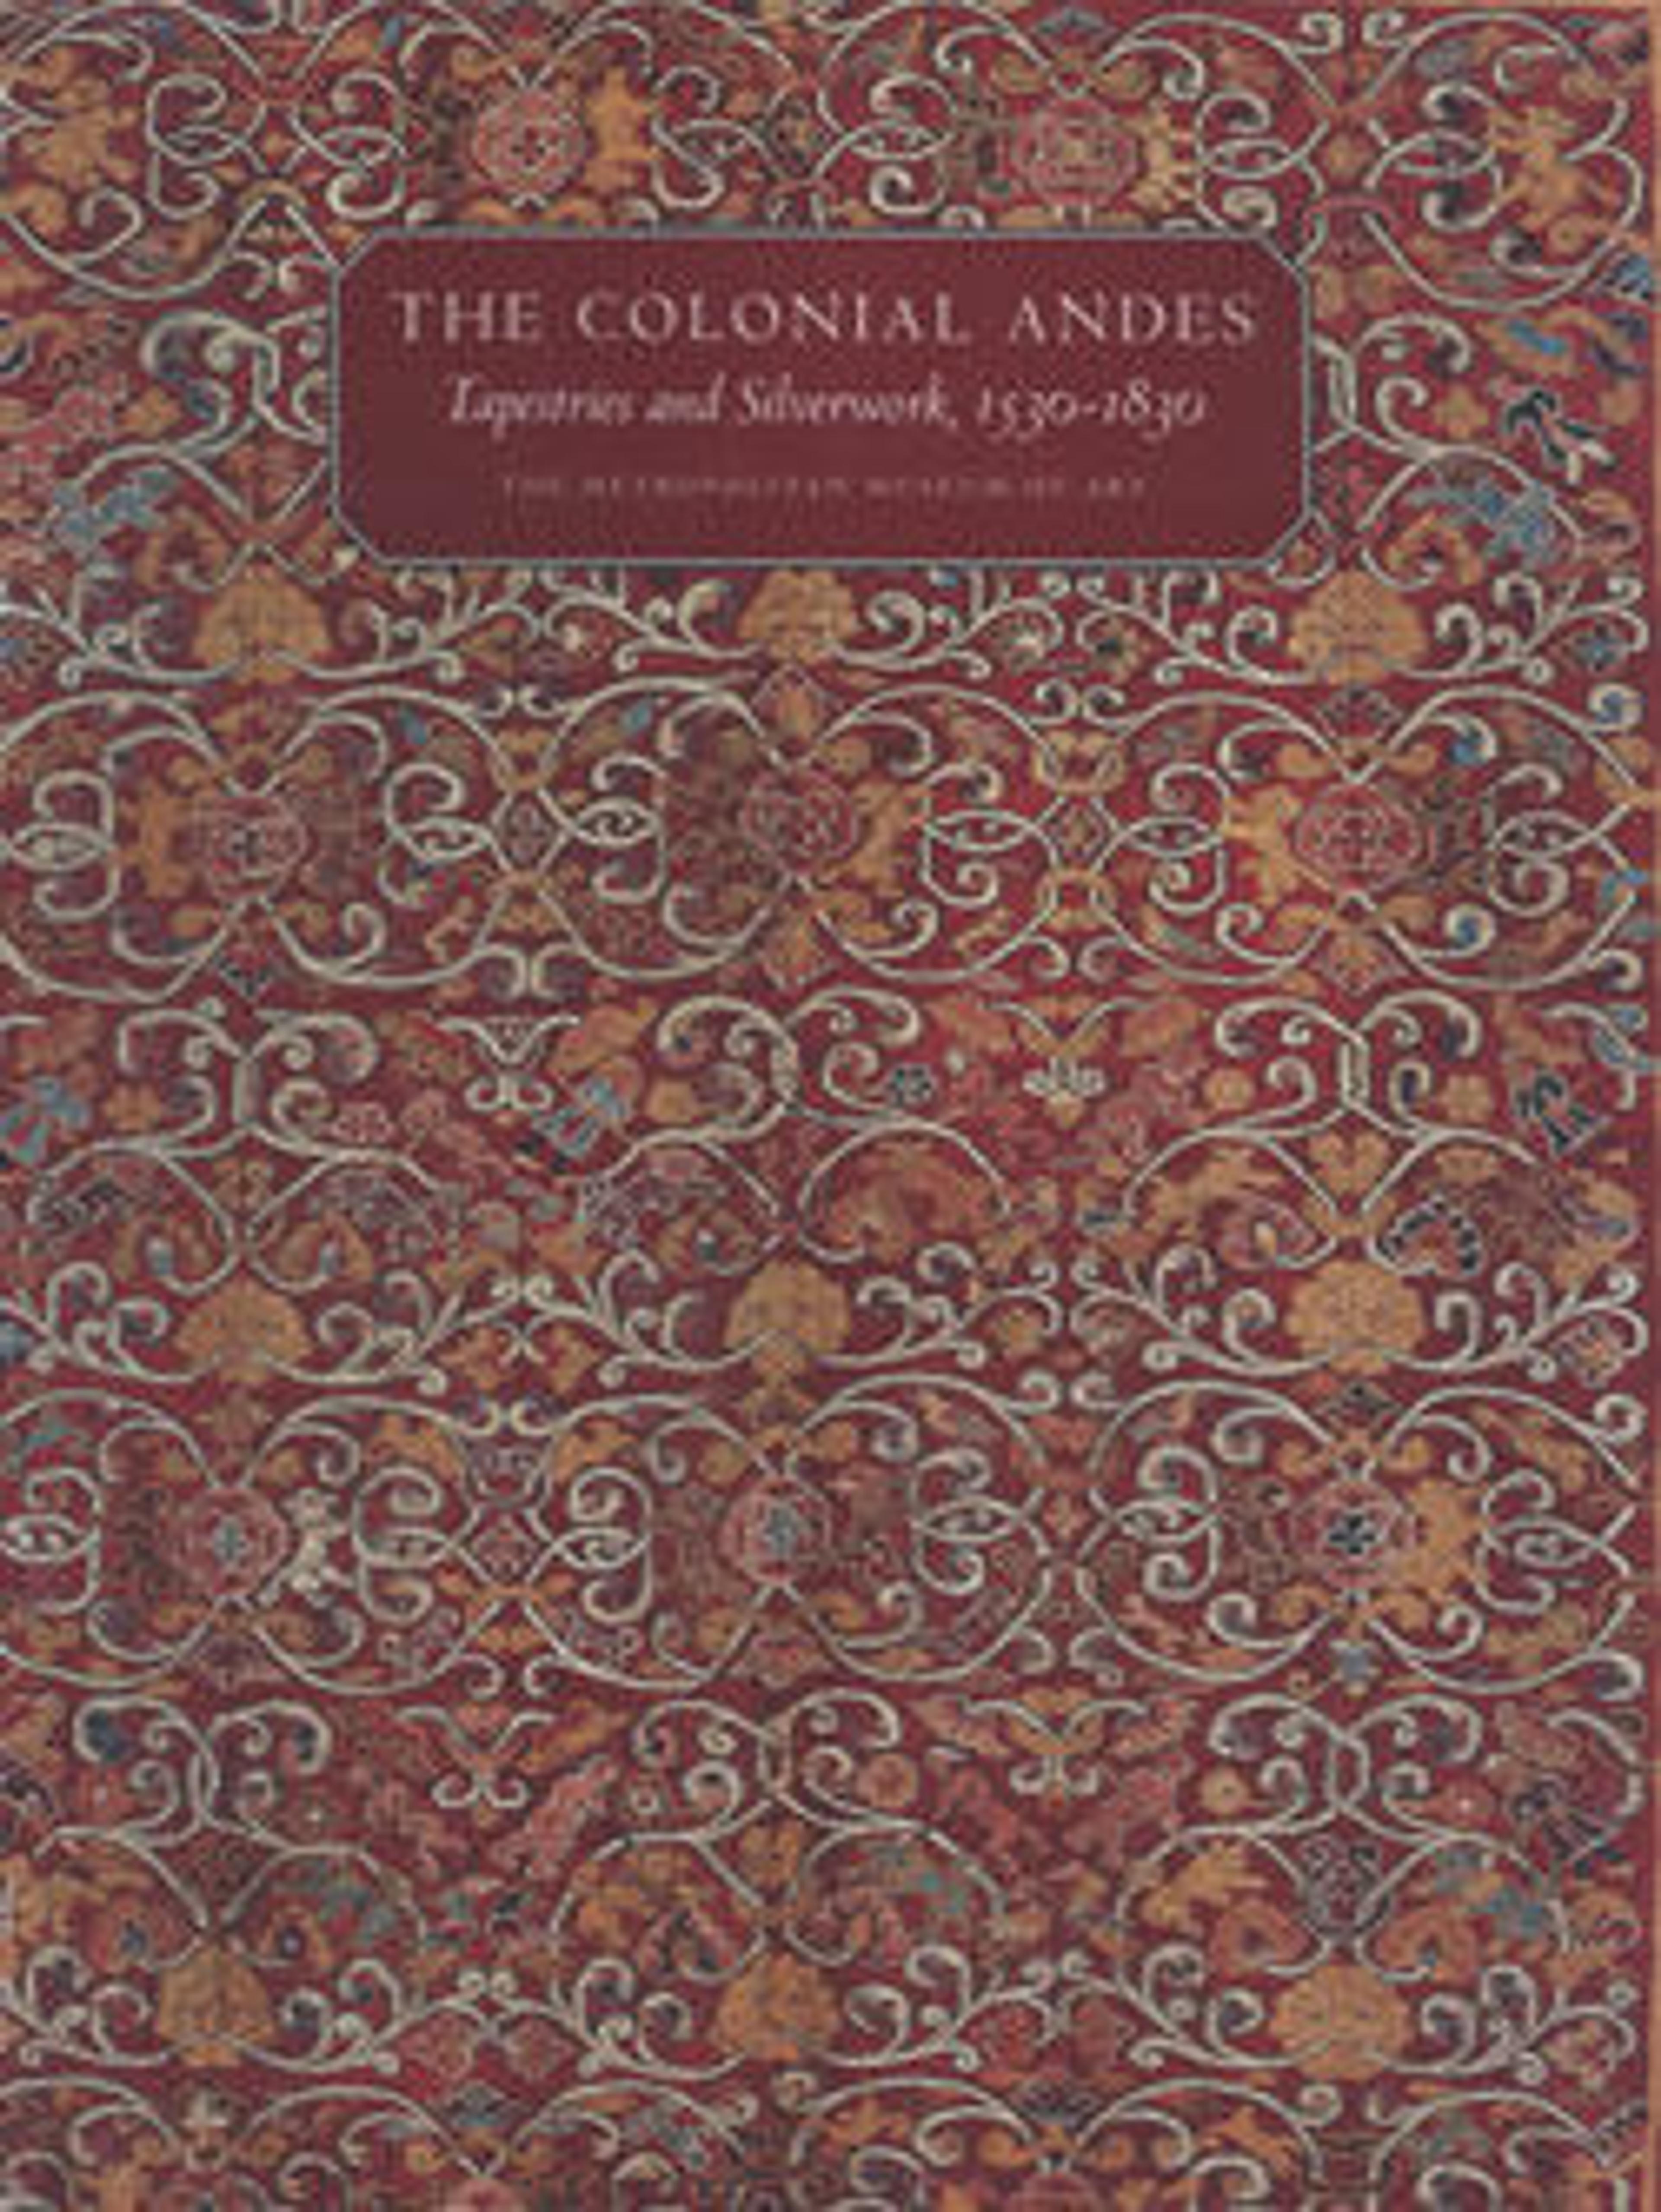 The Colonial Andes: Tapestries and Silverwork, 1530-1830